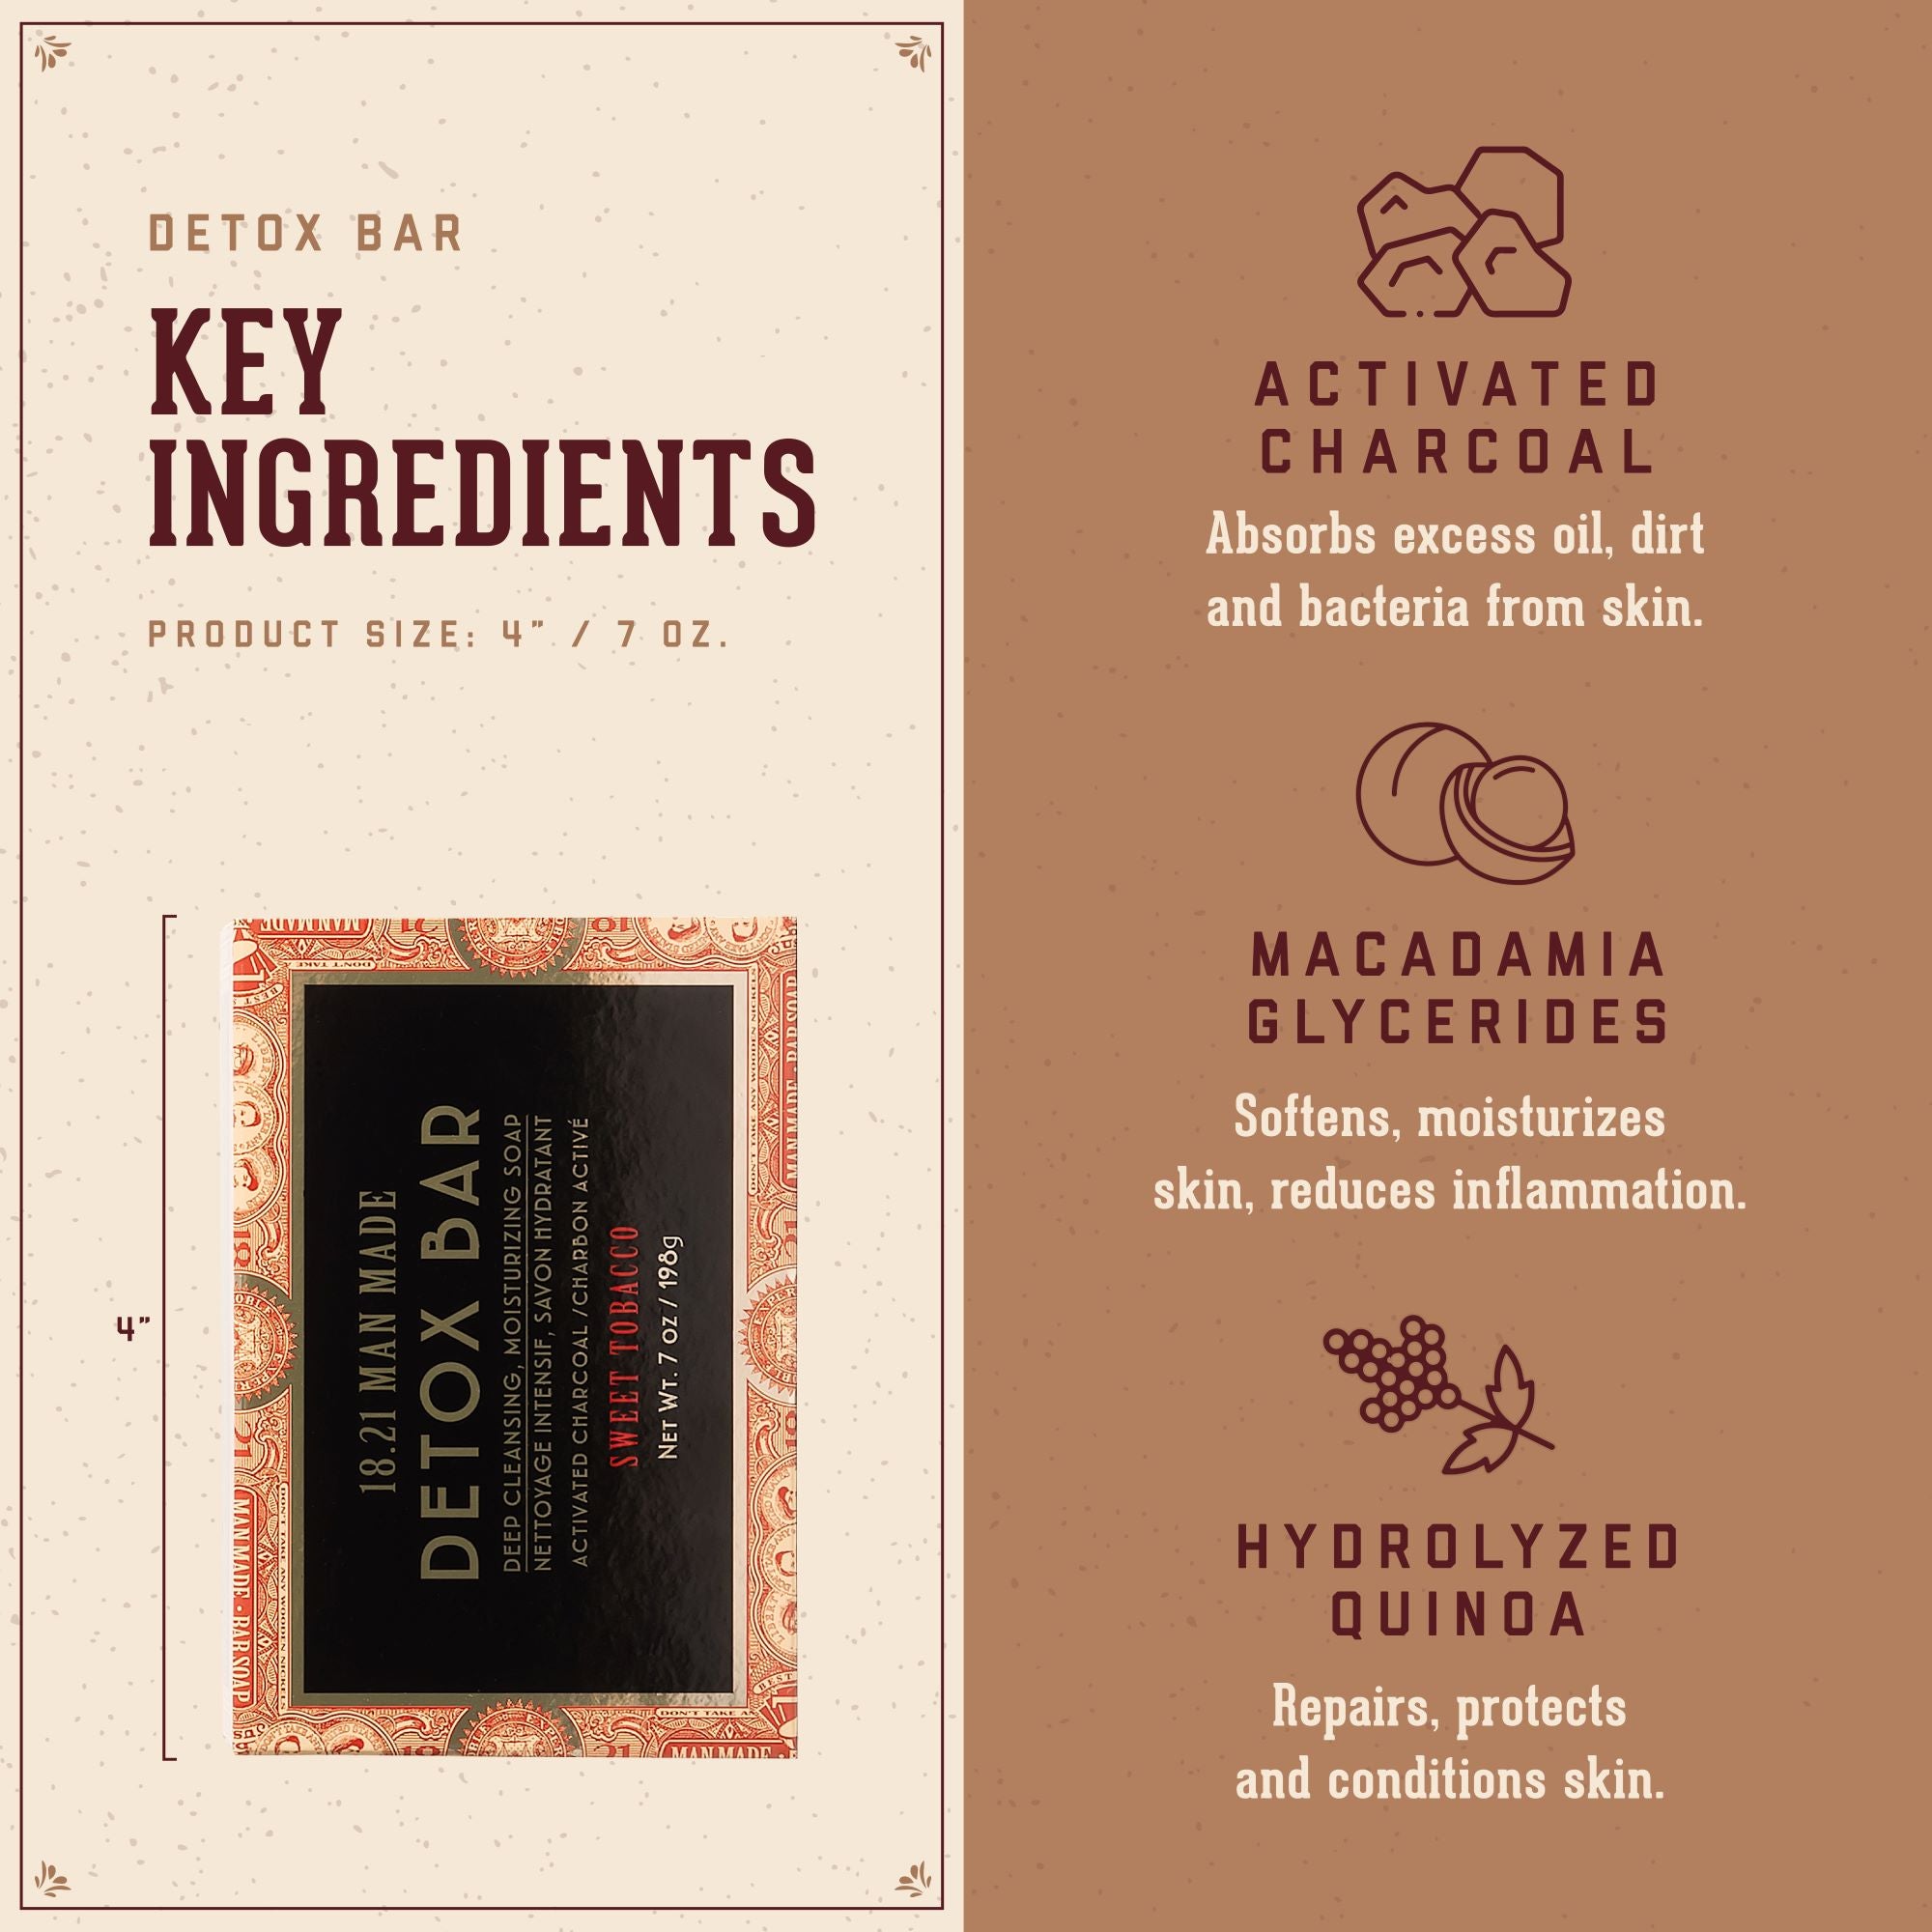 Detox Bar Key Ingrediens:   1. Activated Charcoal: absorbs excess oil, dirt and bacteria from skin.  2. Macademia Glycerides: softens, moisturizes skin, reduces inflammation.  3. Hydrolyzed Quinoa: repairs, protects, and conditions skin.